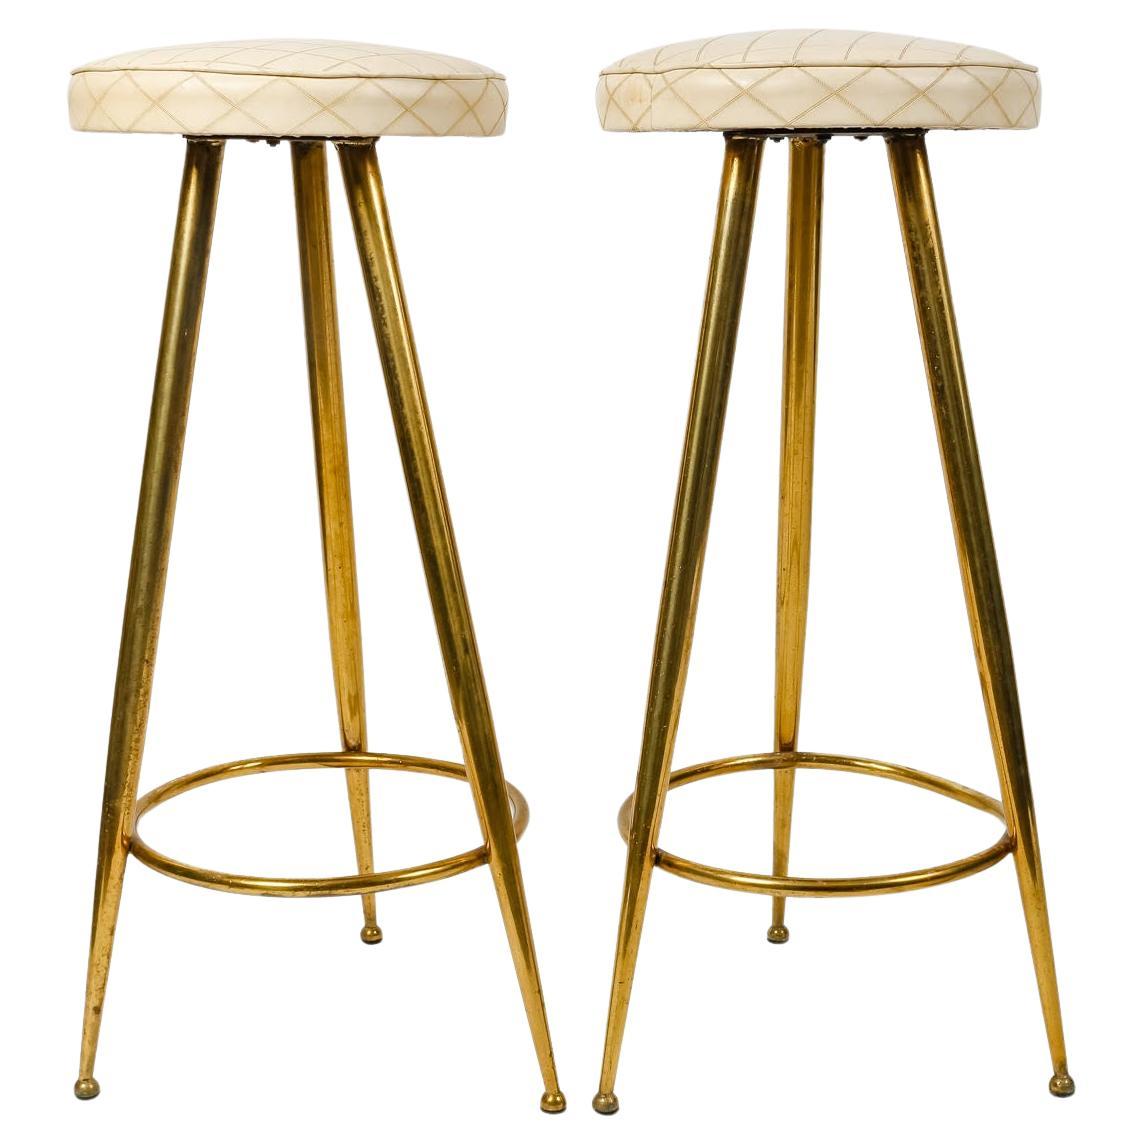 Pair of Tripod Stools by Gio Ponti (1891-1979). For Sale